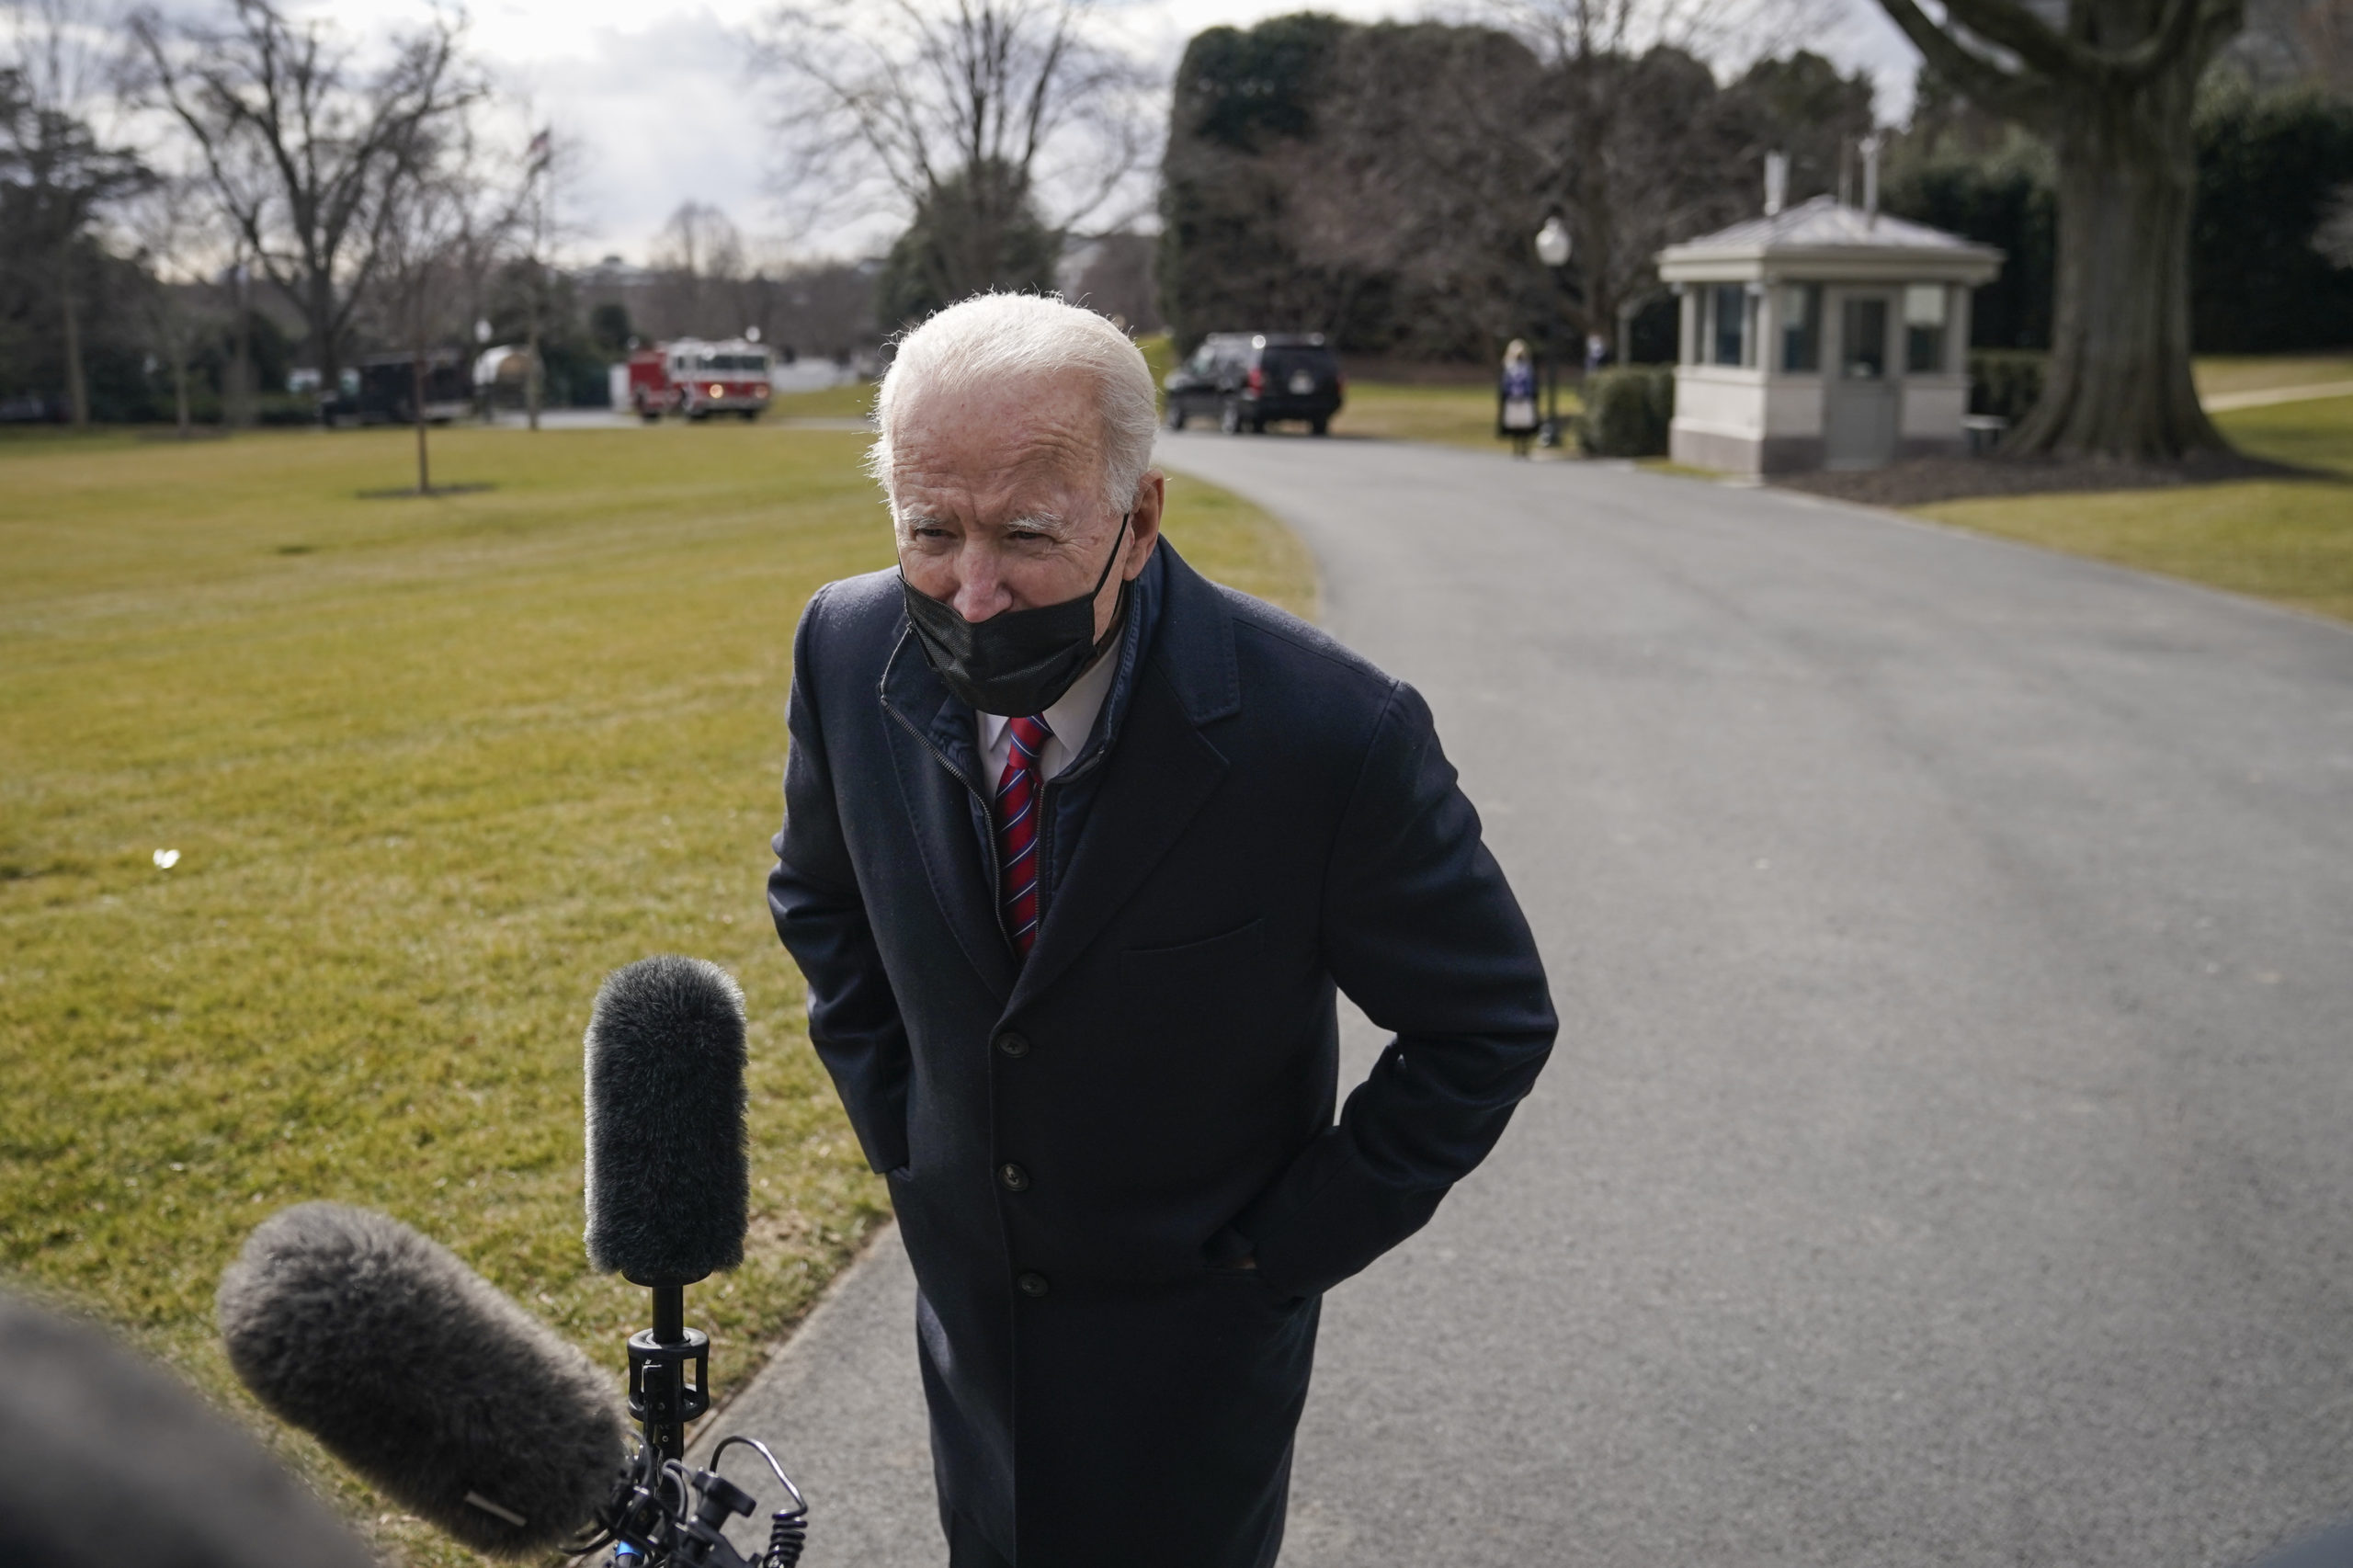 WASHINGTON, DC - JANUARY 29: U.S. President Joe Biden stops to briefly speak with reporters on his way to Marine One on the South Lawn of the White House on January 29, 2021 in Washington, DC. President Biden is traveling to Walter Reed National Military Medical Center to visit with wounded service members. (Photo by Drew Angerer/Getty Images)